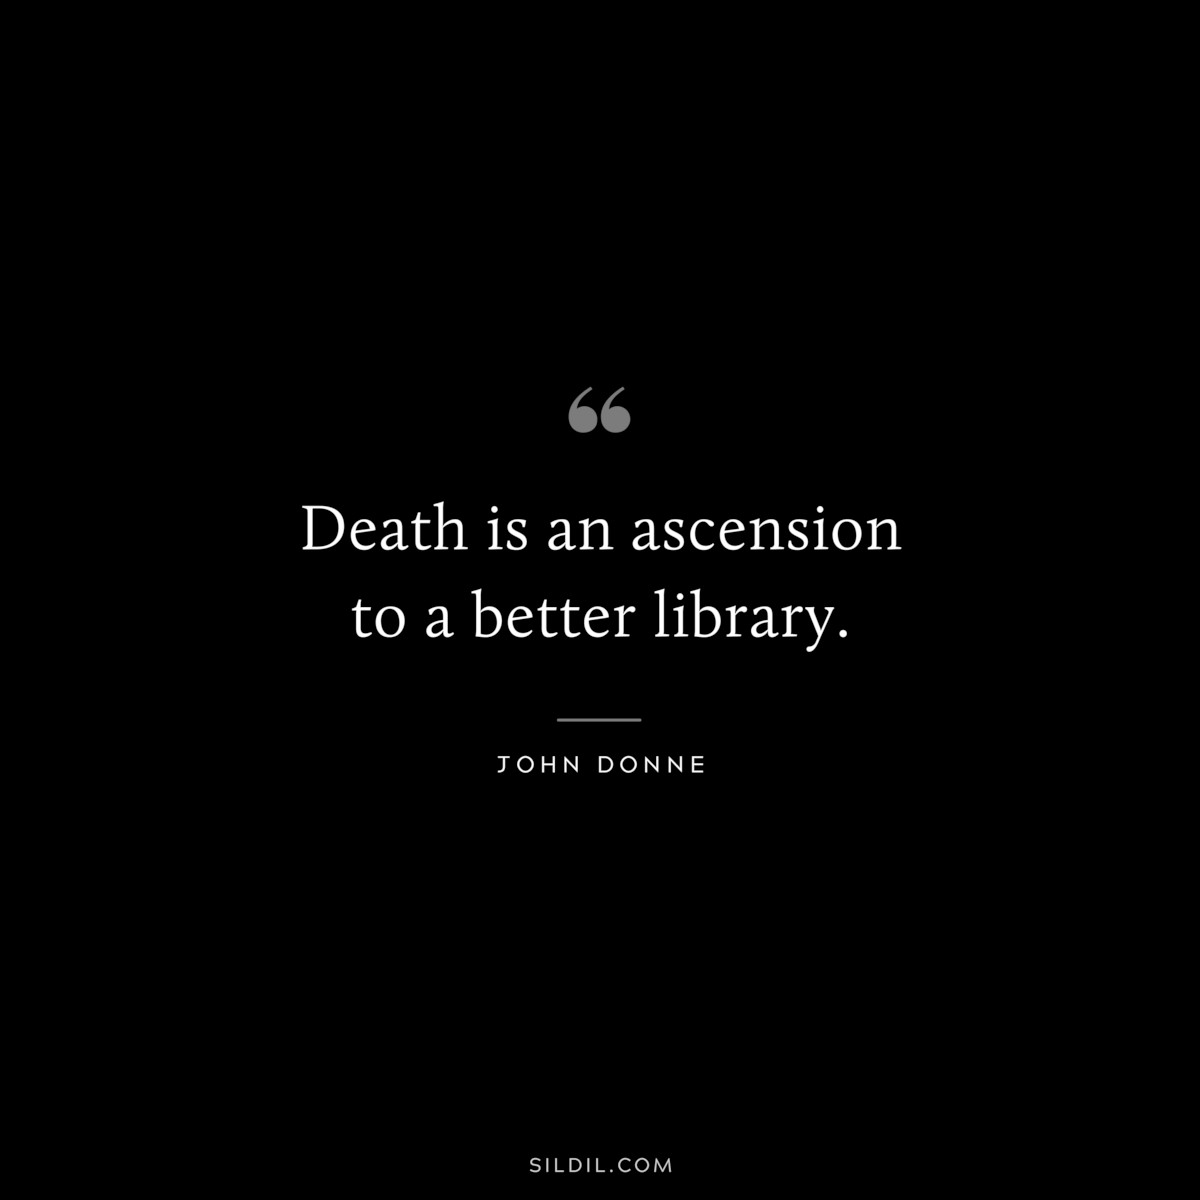 Death is an ascension to a better library. ― John Donne